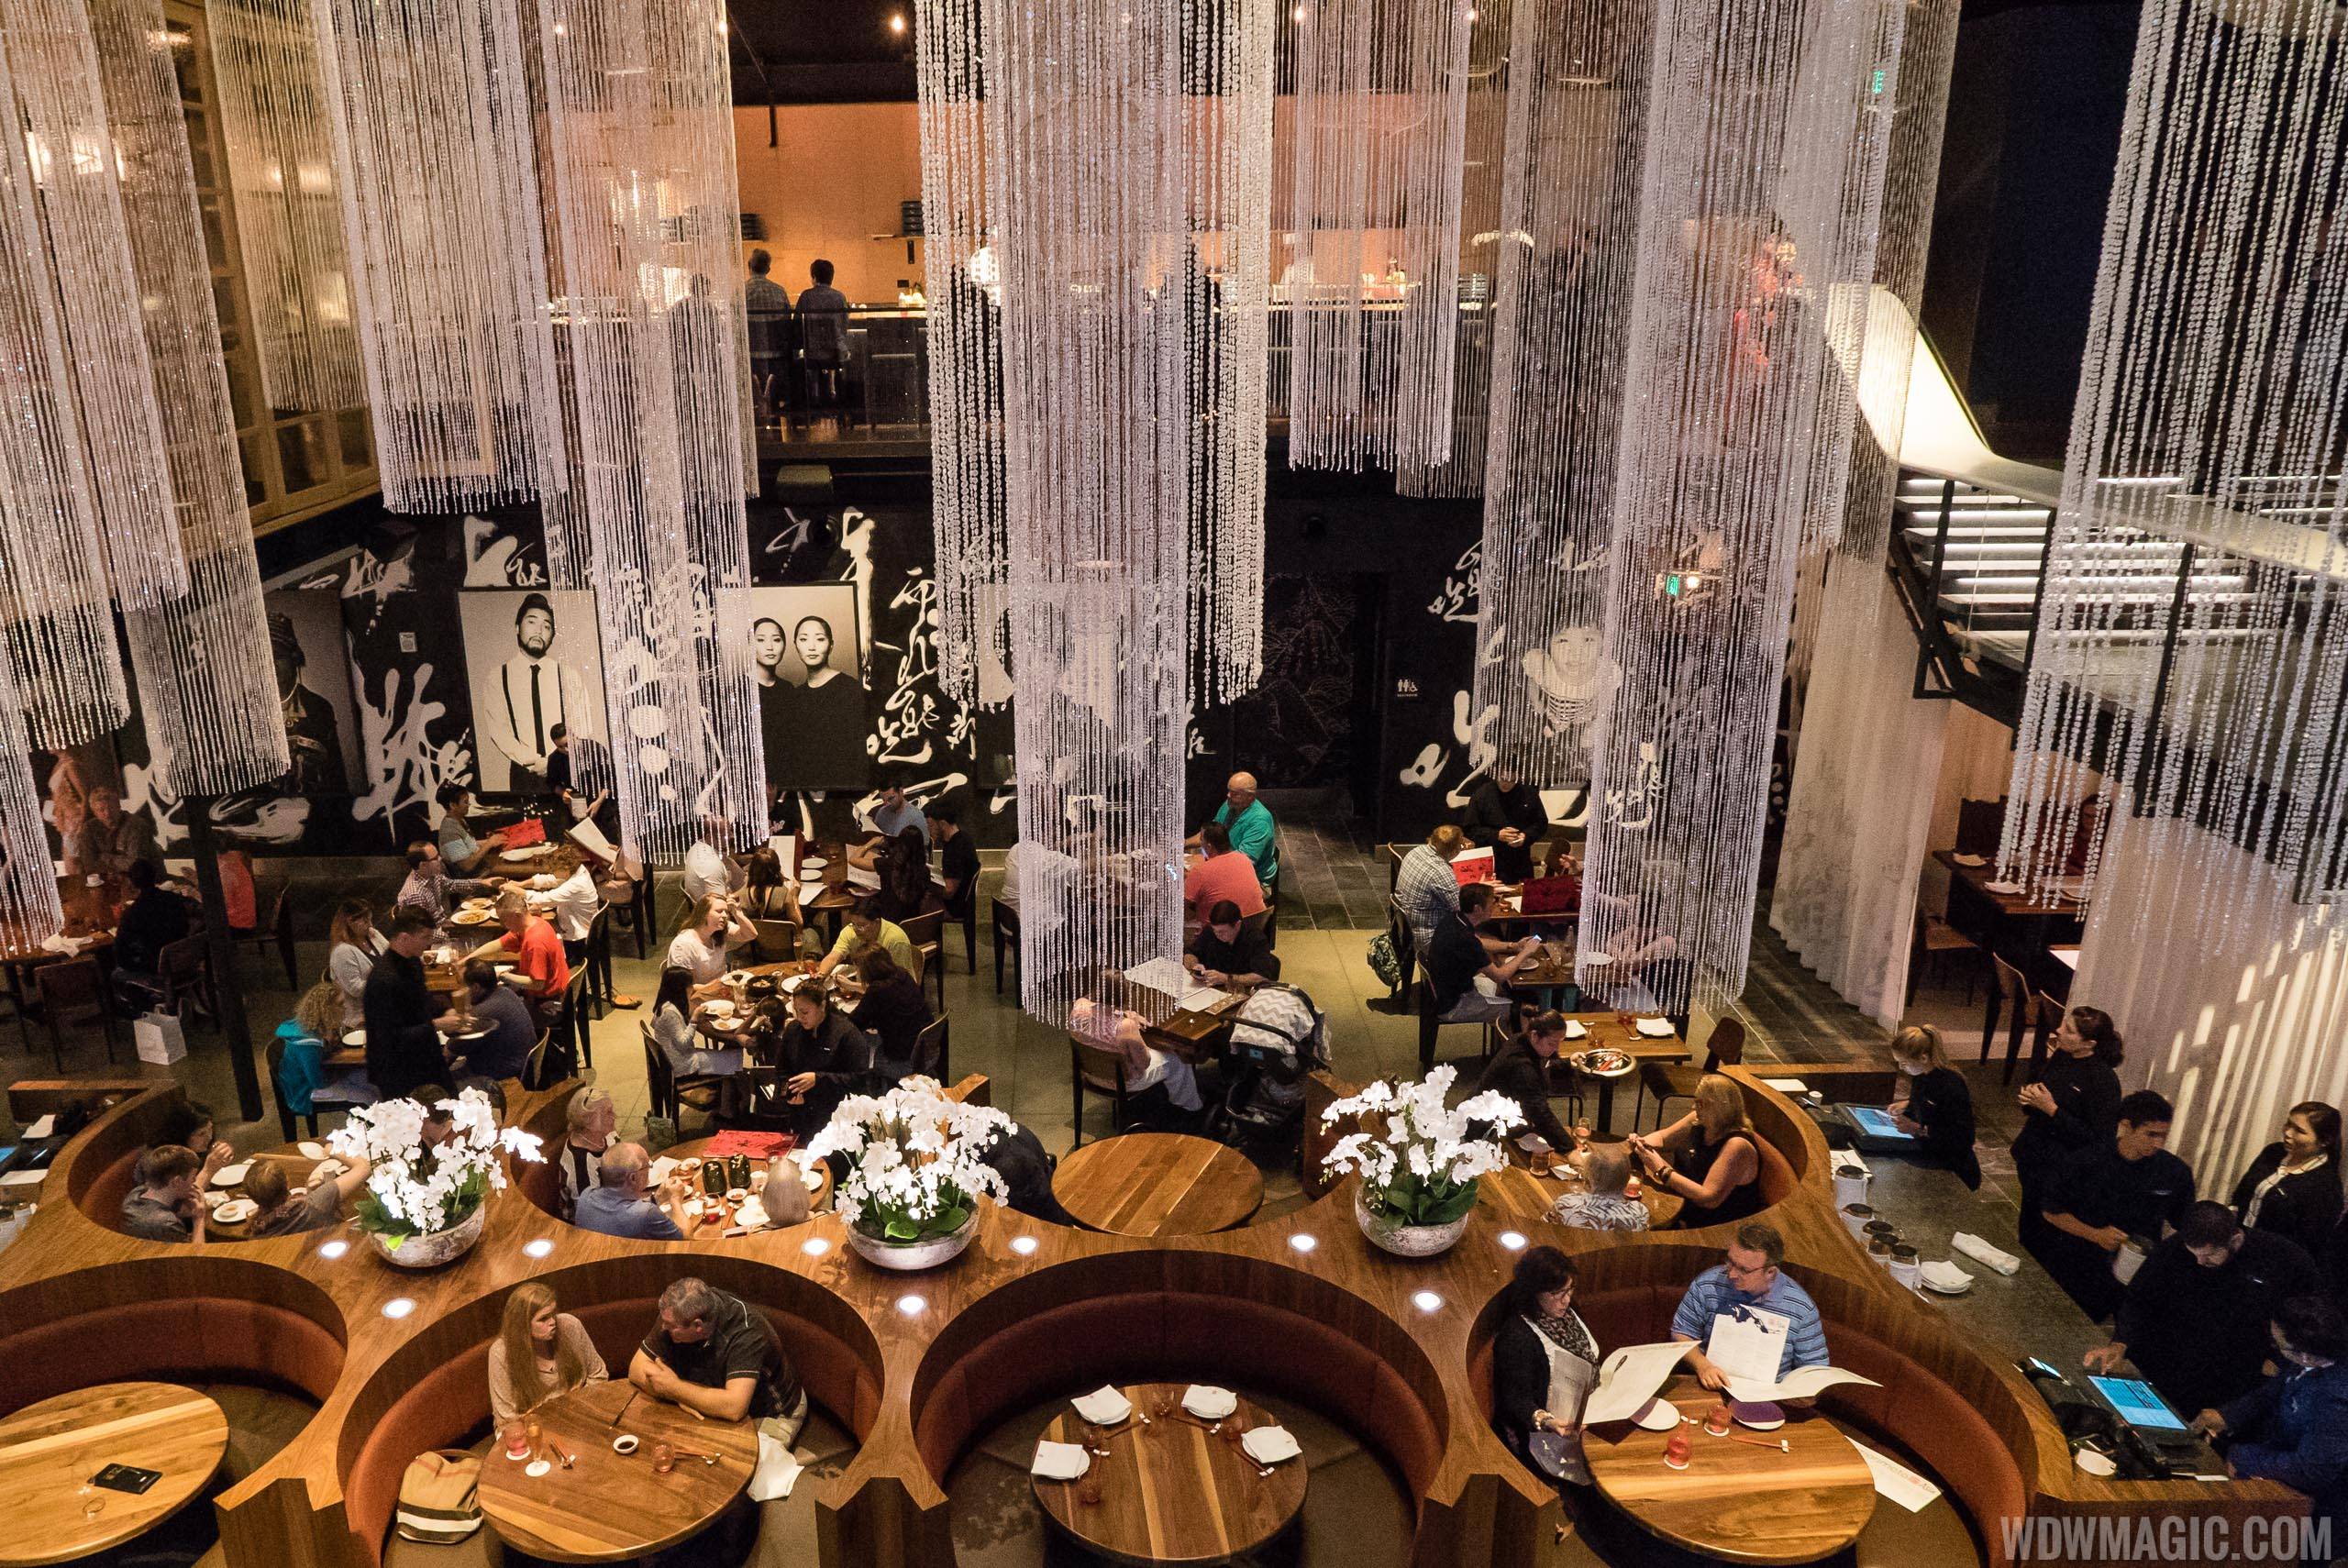 NYC Design Awards gives more insight into the creation of Morimoto Asia